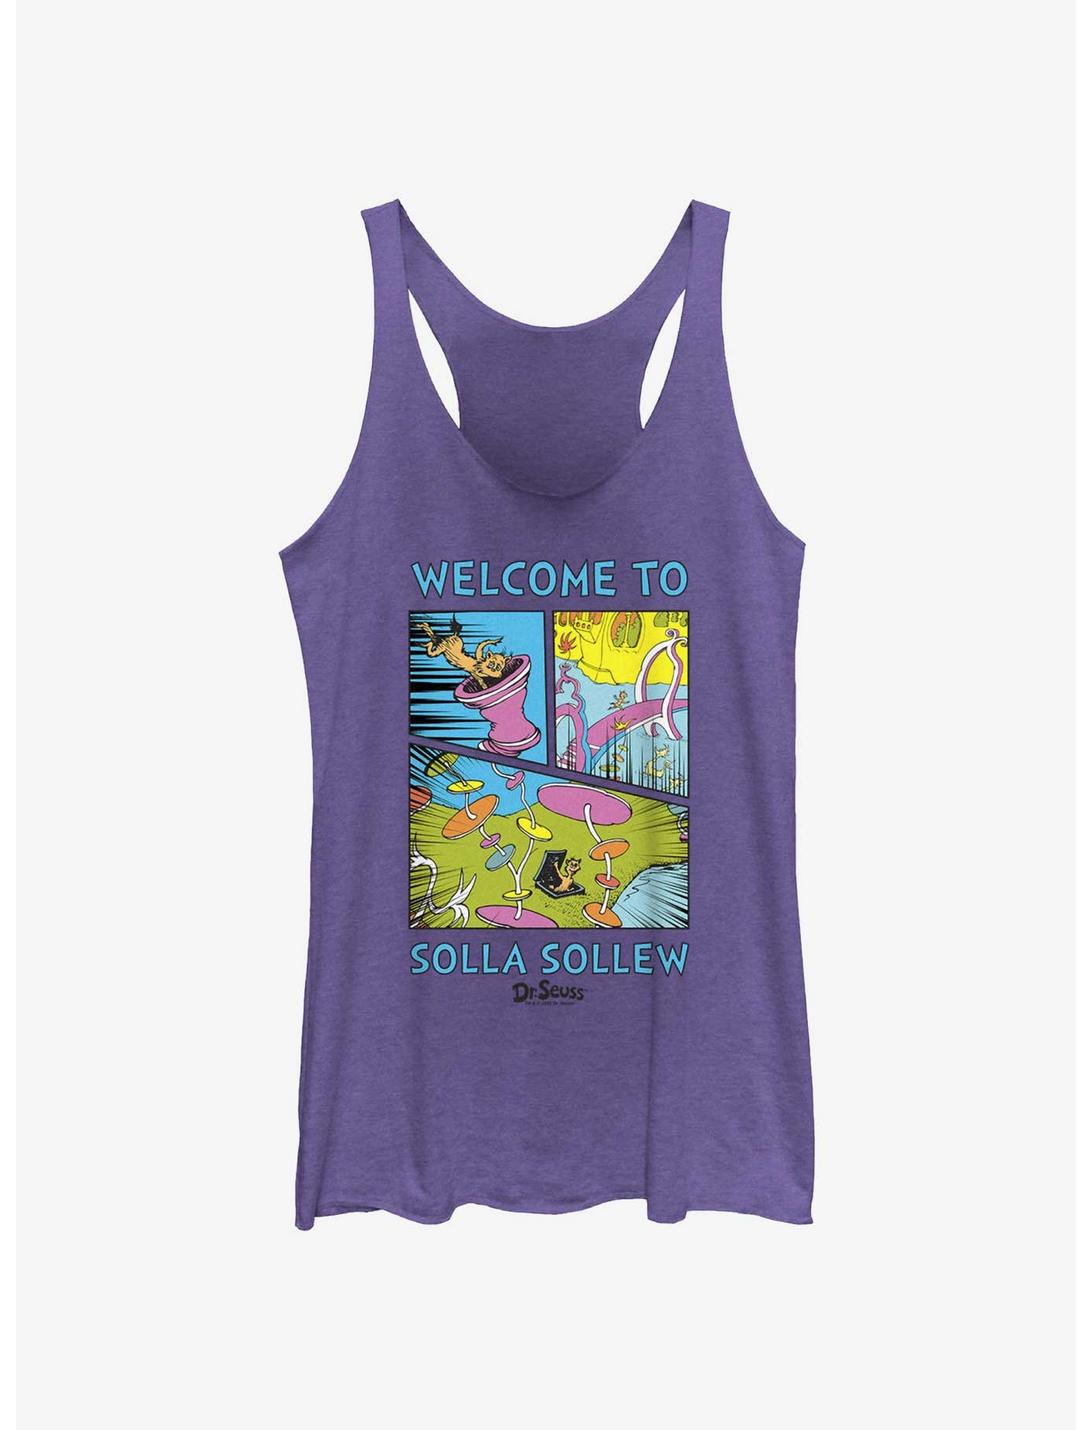 Dr. Seuss's I Had Trouble Getting Into Solla Sollew Welcome To Solla Sollew Womens Tank Top, PUR HTR, hi-res